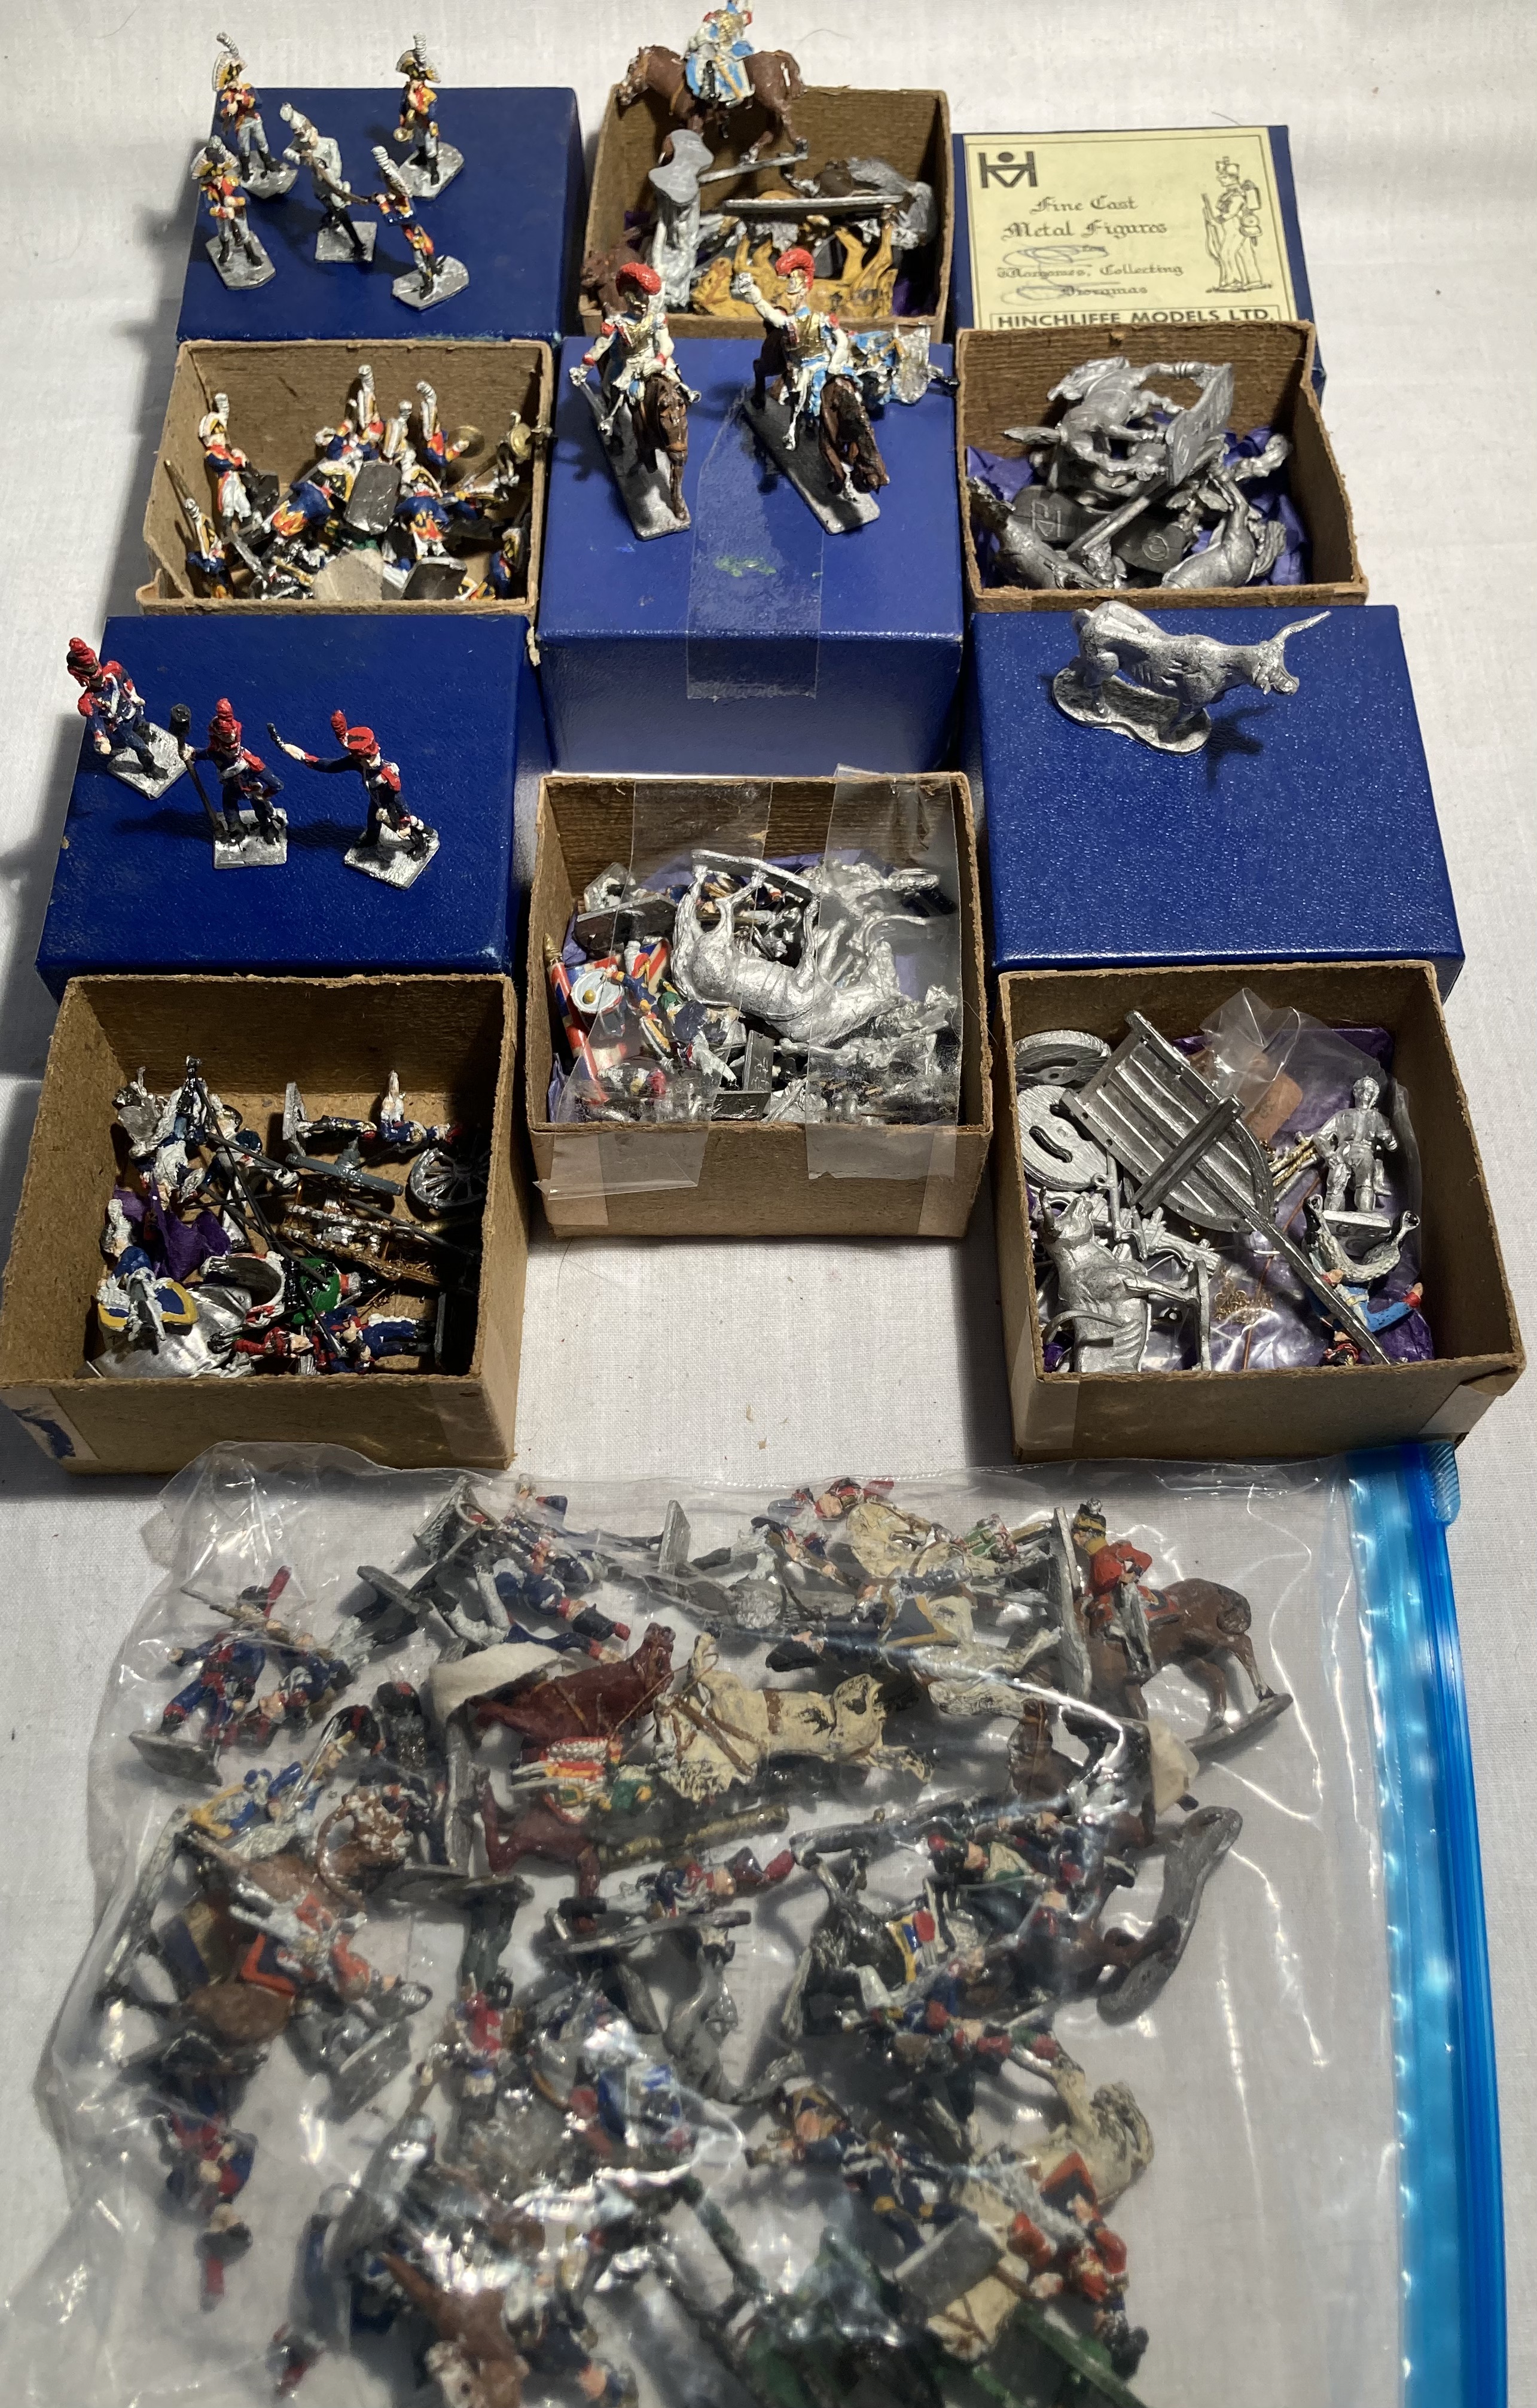 Hinchliffe: A collection of assorted Hinchliffe metal figures and horses, over 100 models, some hand